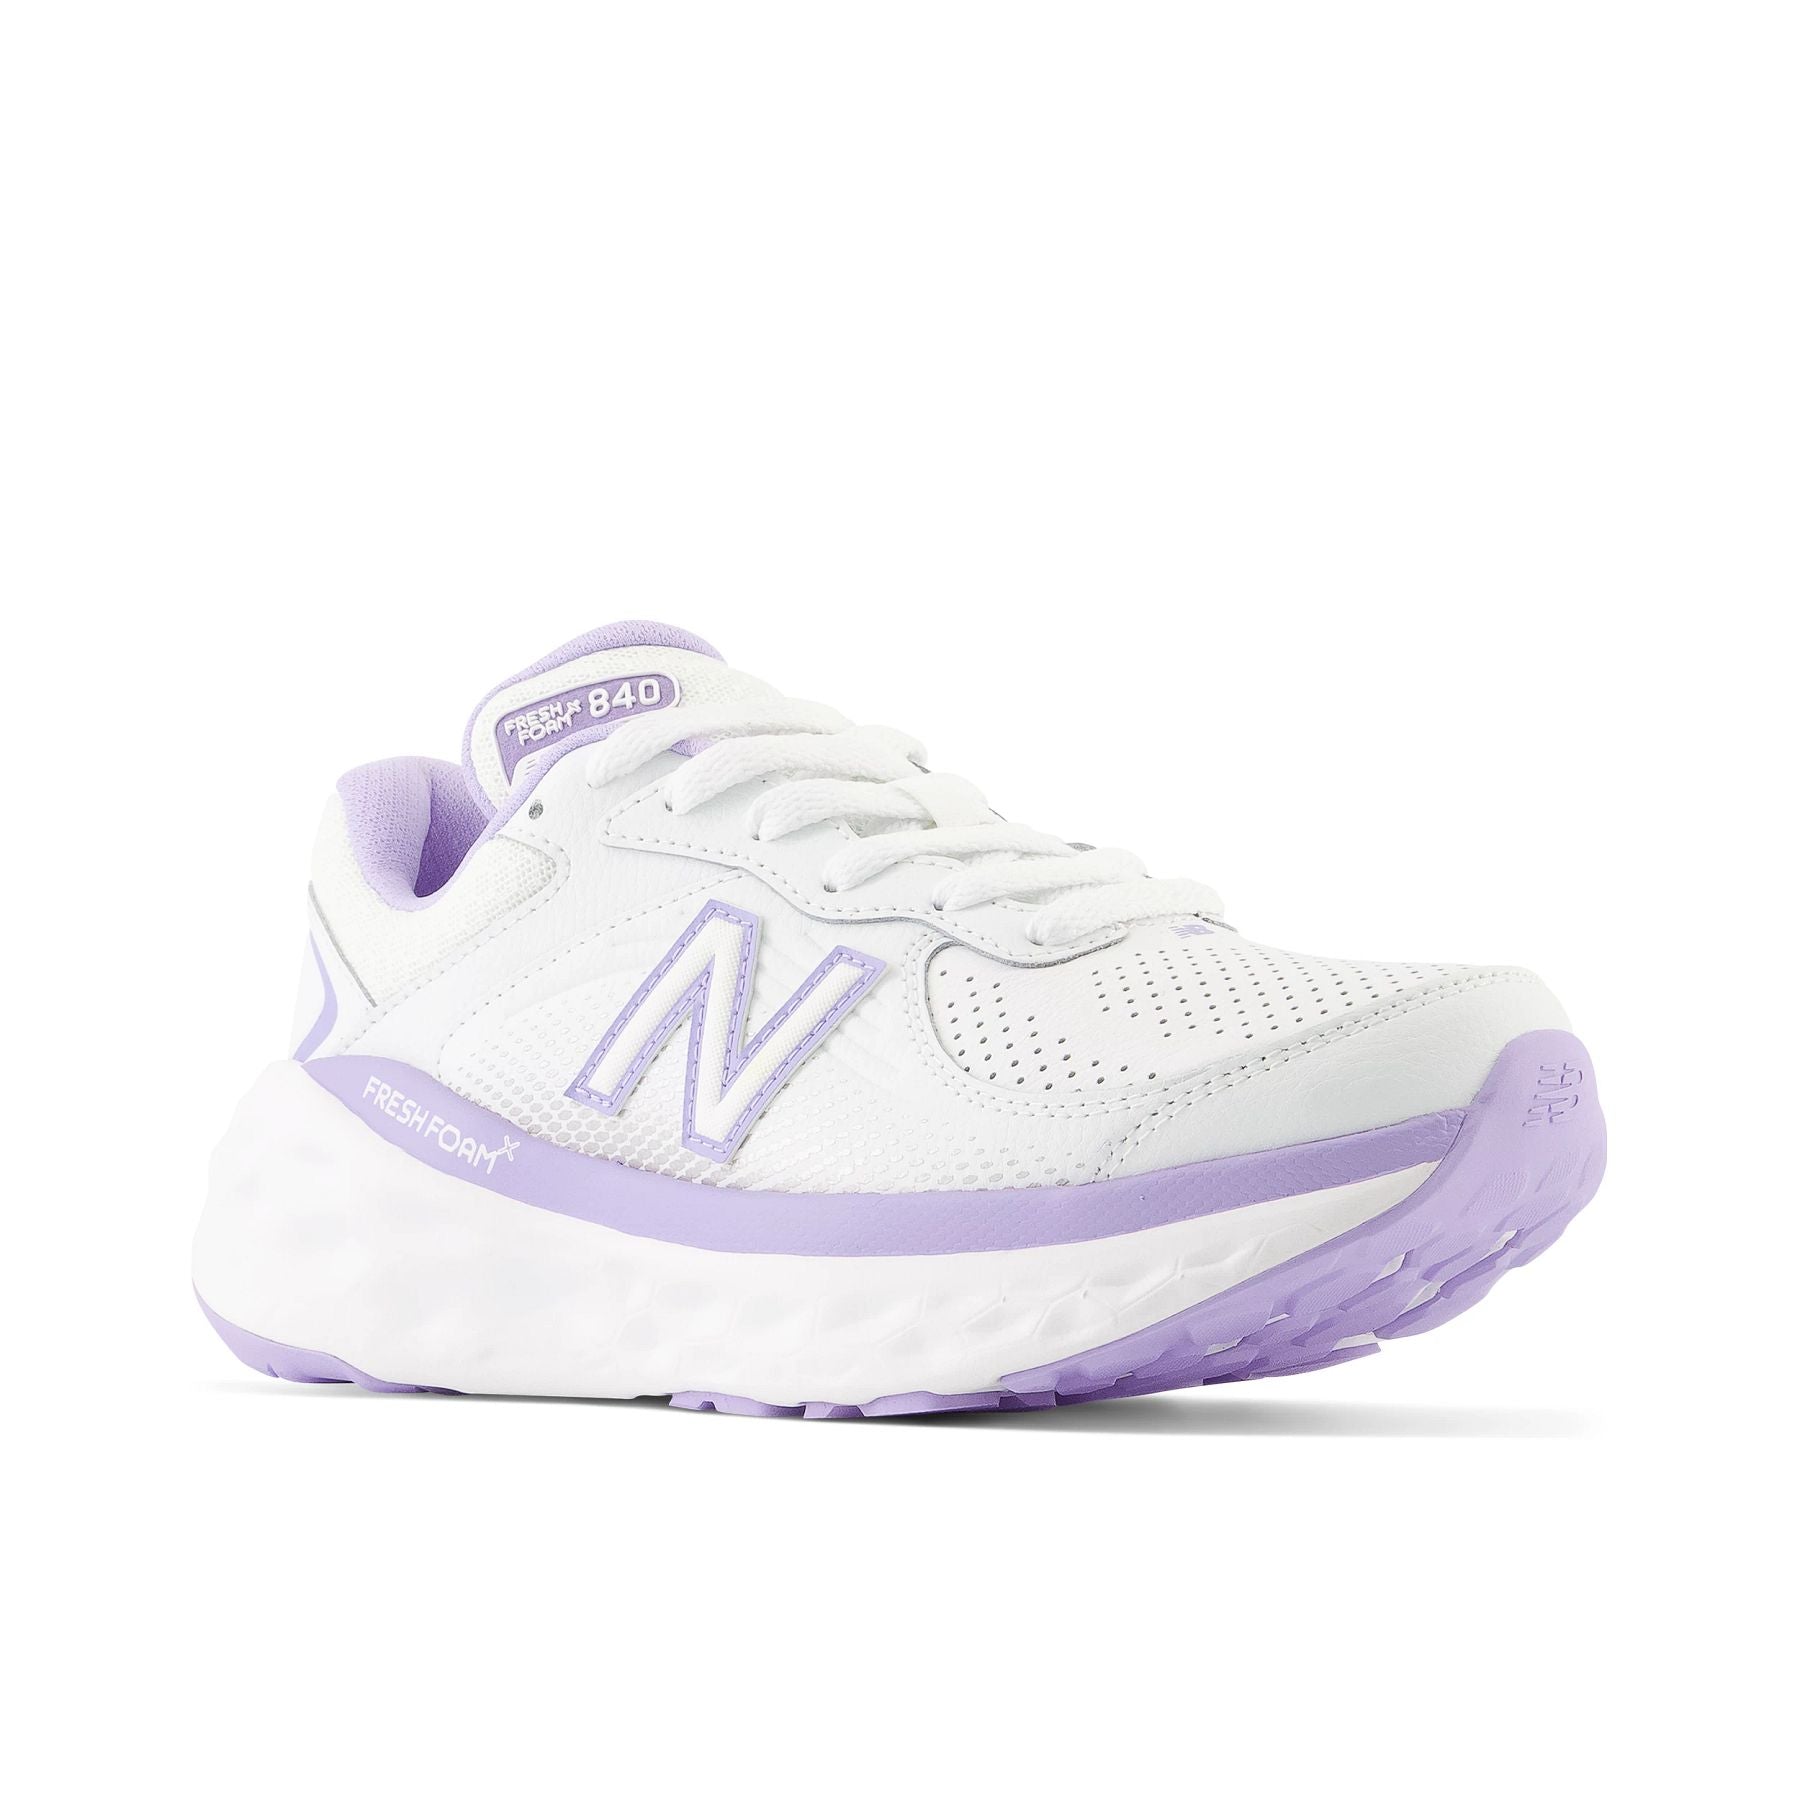 Front angle view of the Women's leather walking shoe WW840 V1 by New Balance in White/Light Purple